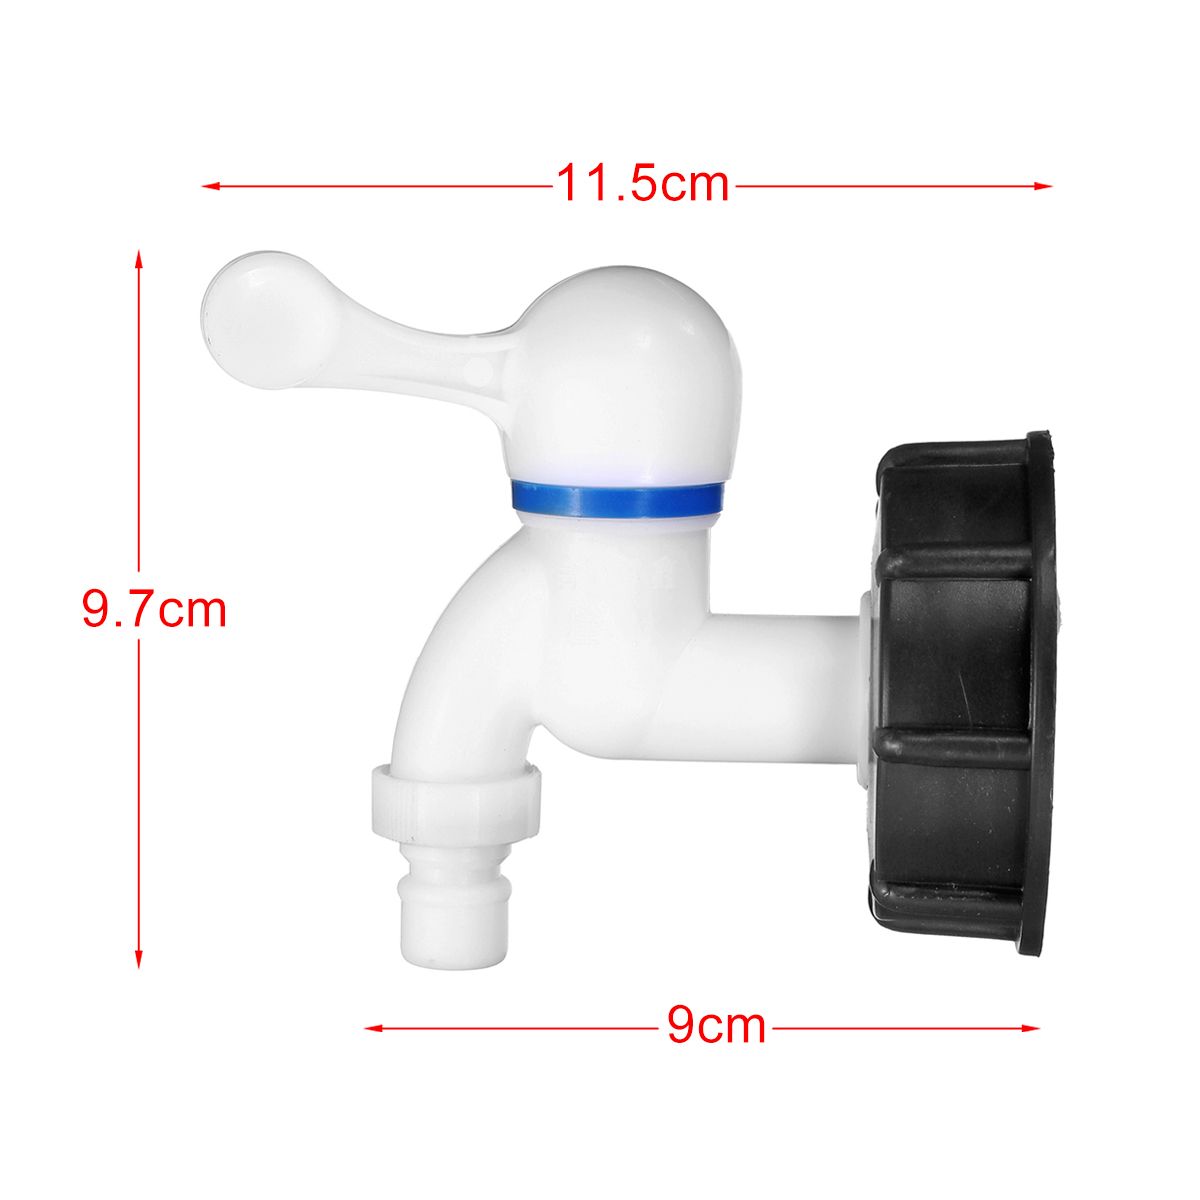 2-Inch-IBC-Thread-Tank-Adapter-S60x6-Valve-Fitting-Replacement-Tap-Connector-Kit-1348510